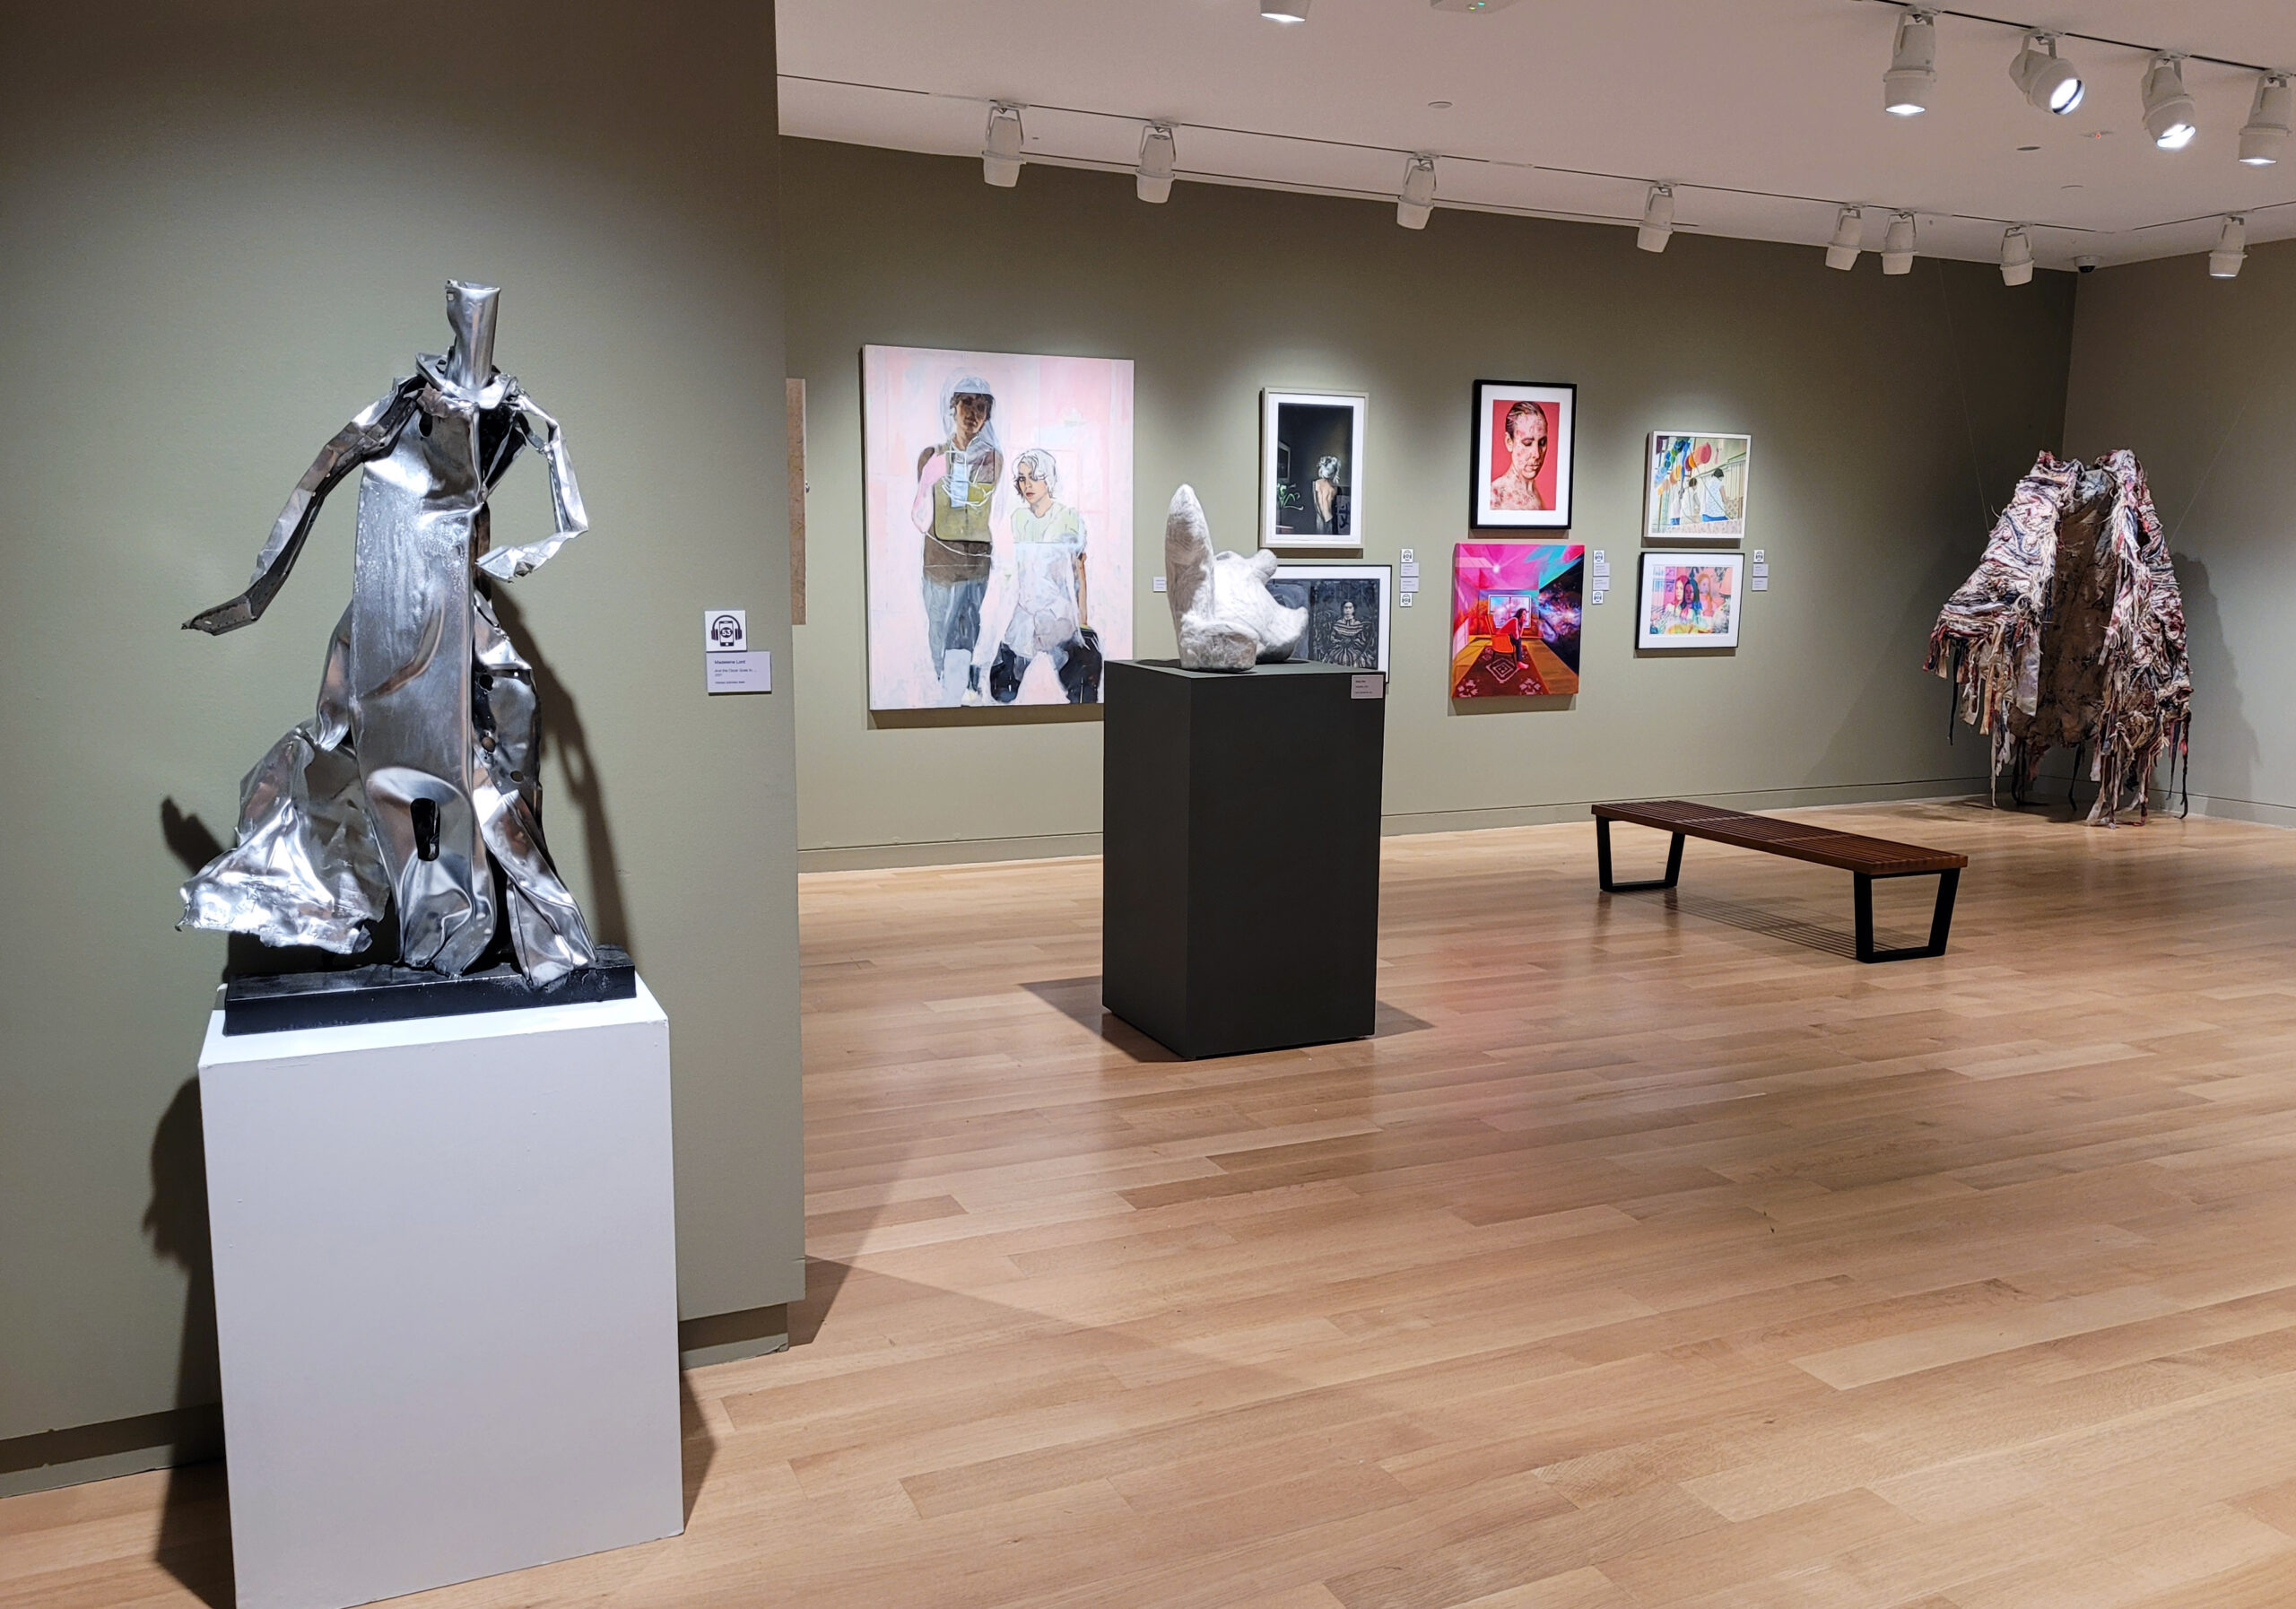 Photograph of a gallery installation with sage green walls. There is a silver metal sculpture in the front left on a white pedestal. Another pedestal and a hanging cloak piece are in the room, with artwork hanging on the wall.